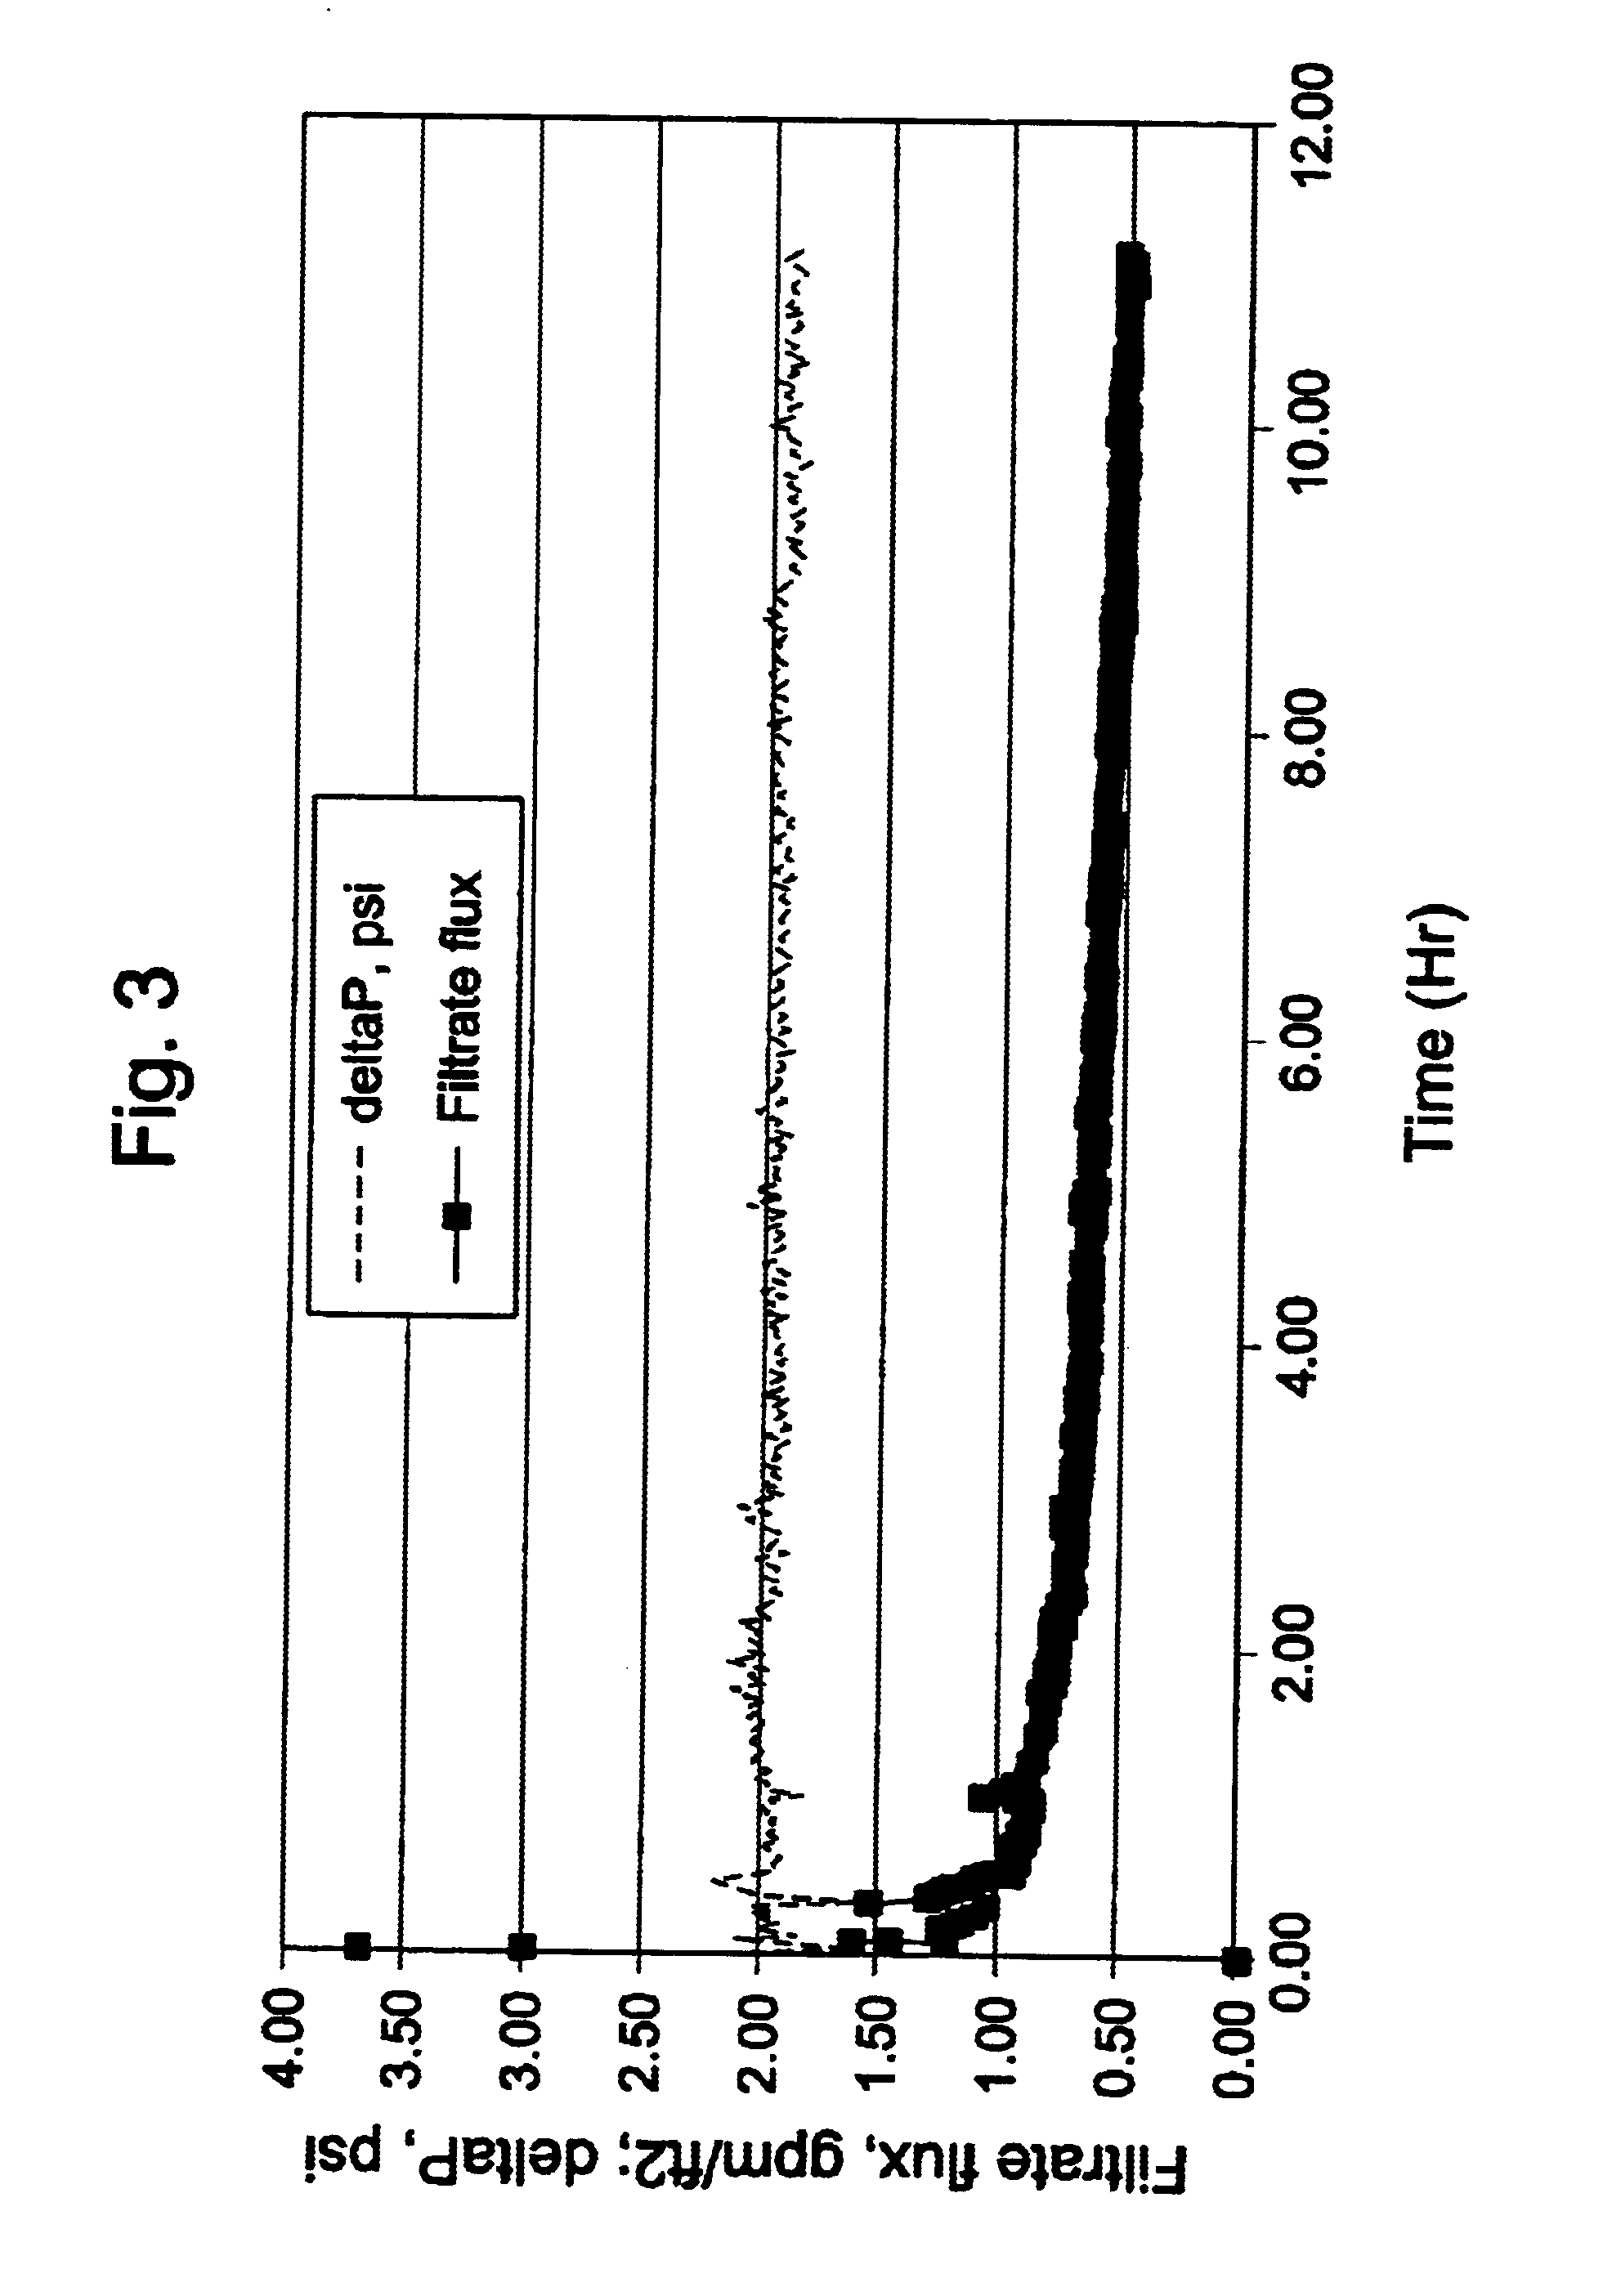 Optimized solid/liquid separation system for multiphase converters